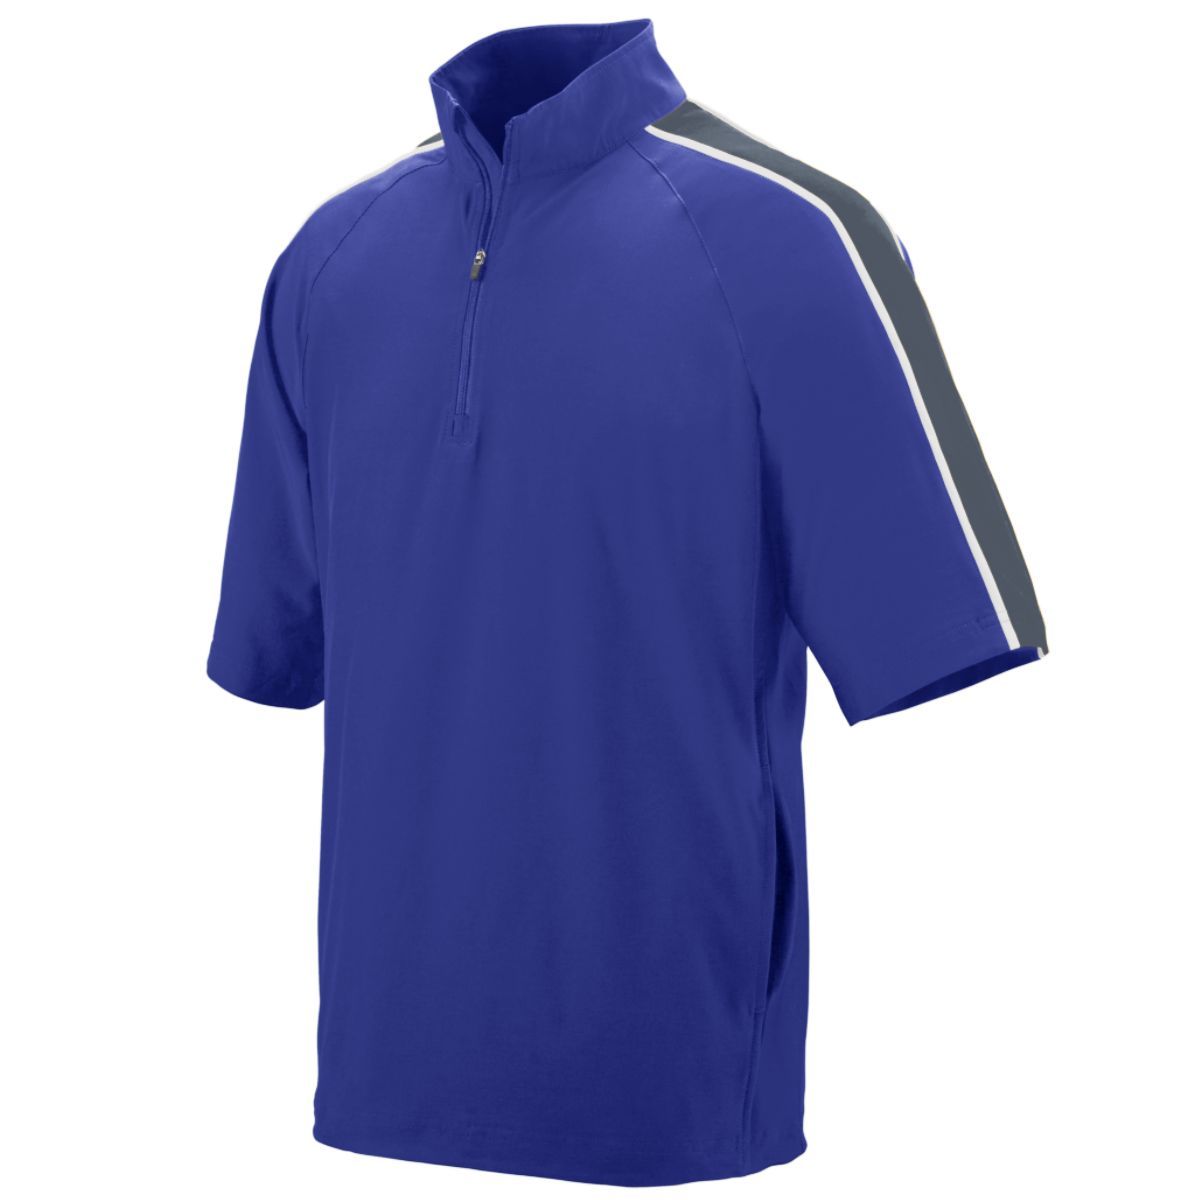 Augusta Sportswear Quantum Short Sleeve Pullover in Purple/Graphite/White  -Part of the Adult, Adult-Jacket, Augusta-Products, Outerwear product lines at KanaleyCreations.com